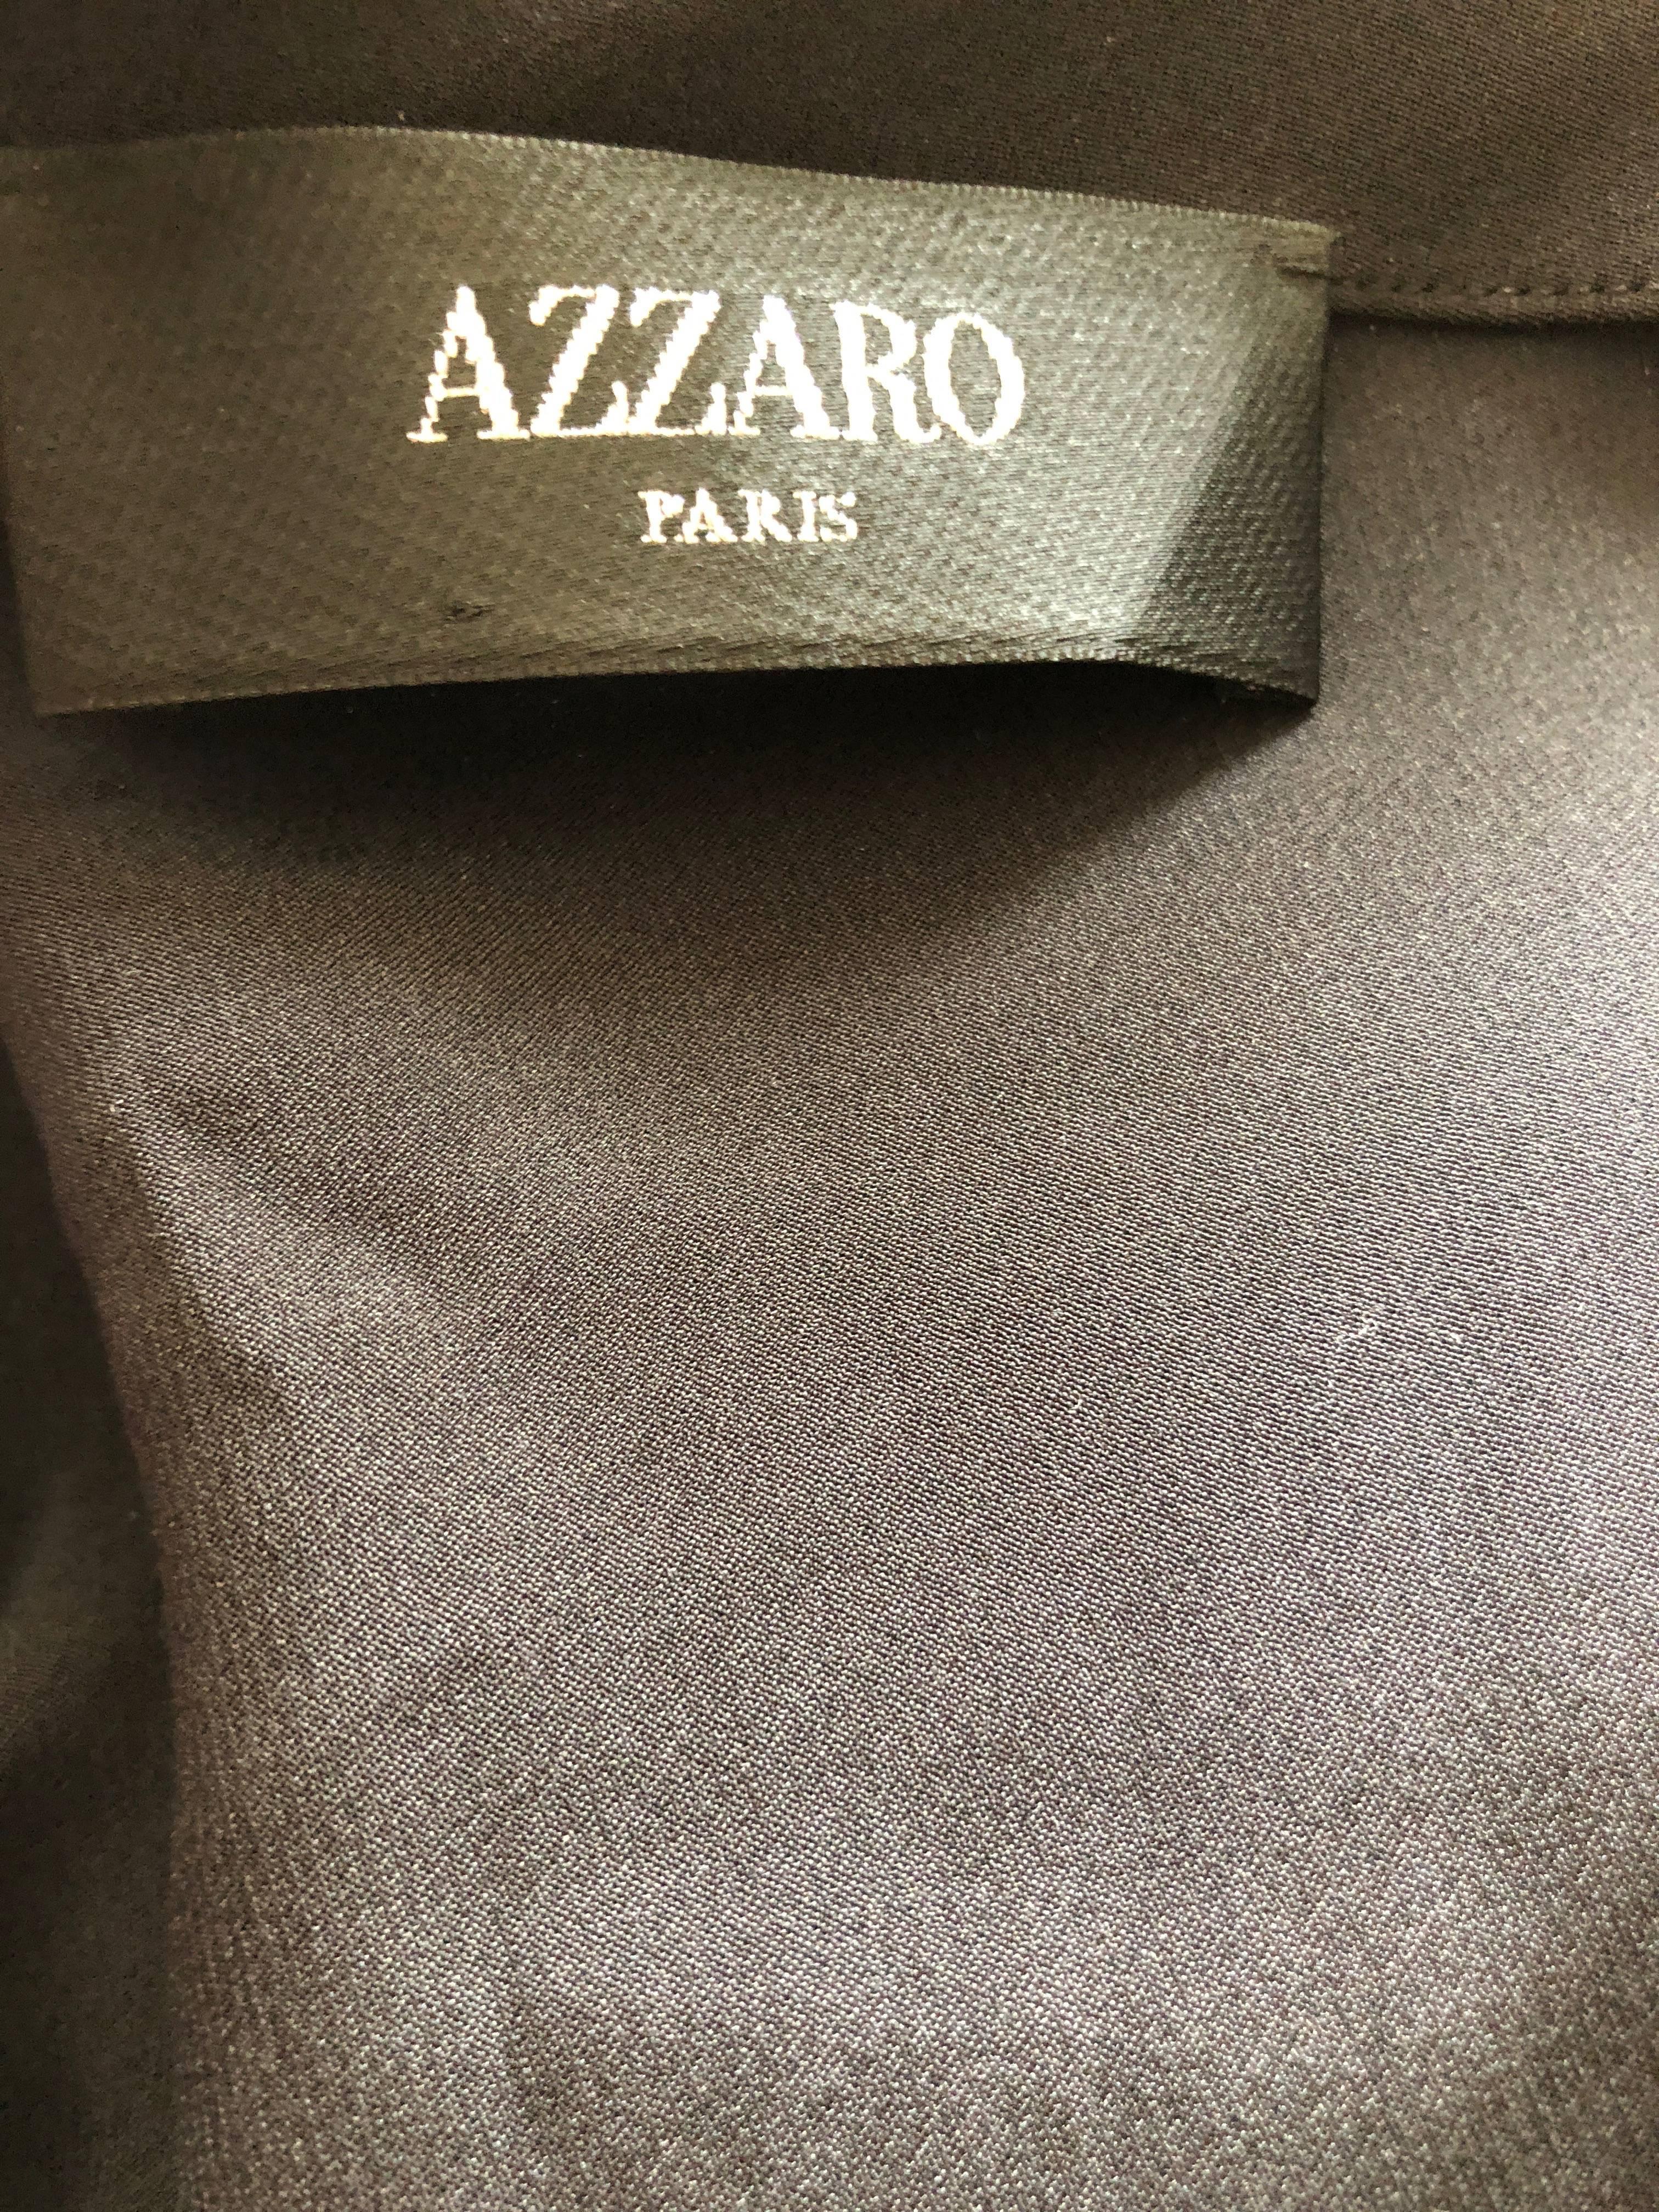 Azzaro Iconic Keyhole Backless Dress with Crystal and Cording Details For Sale 4